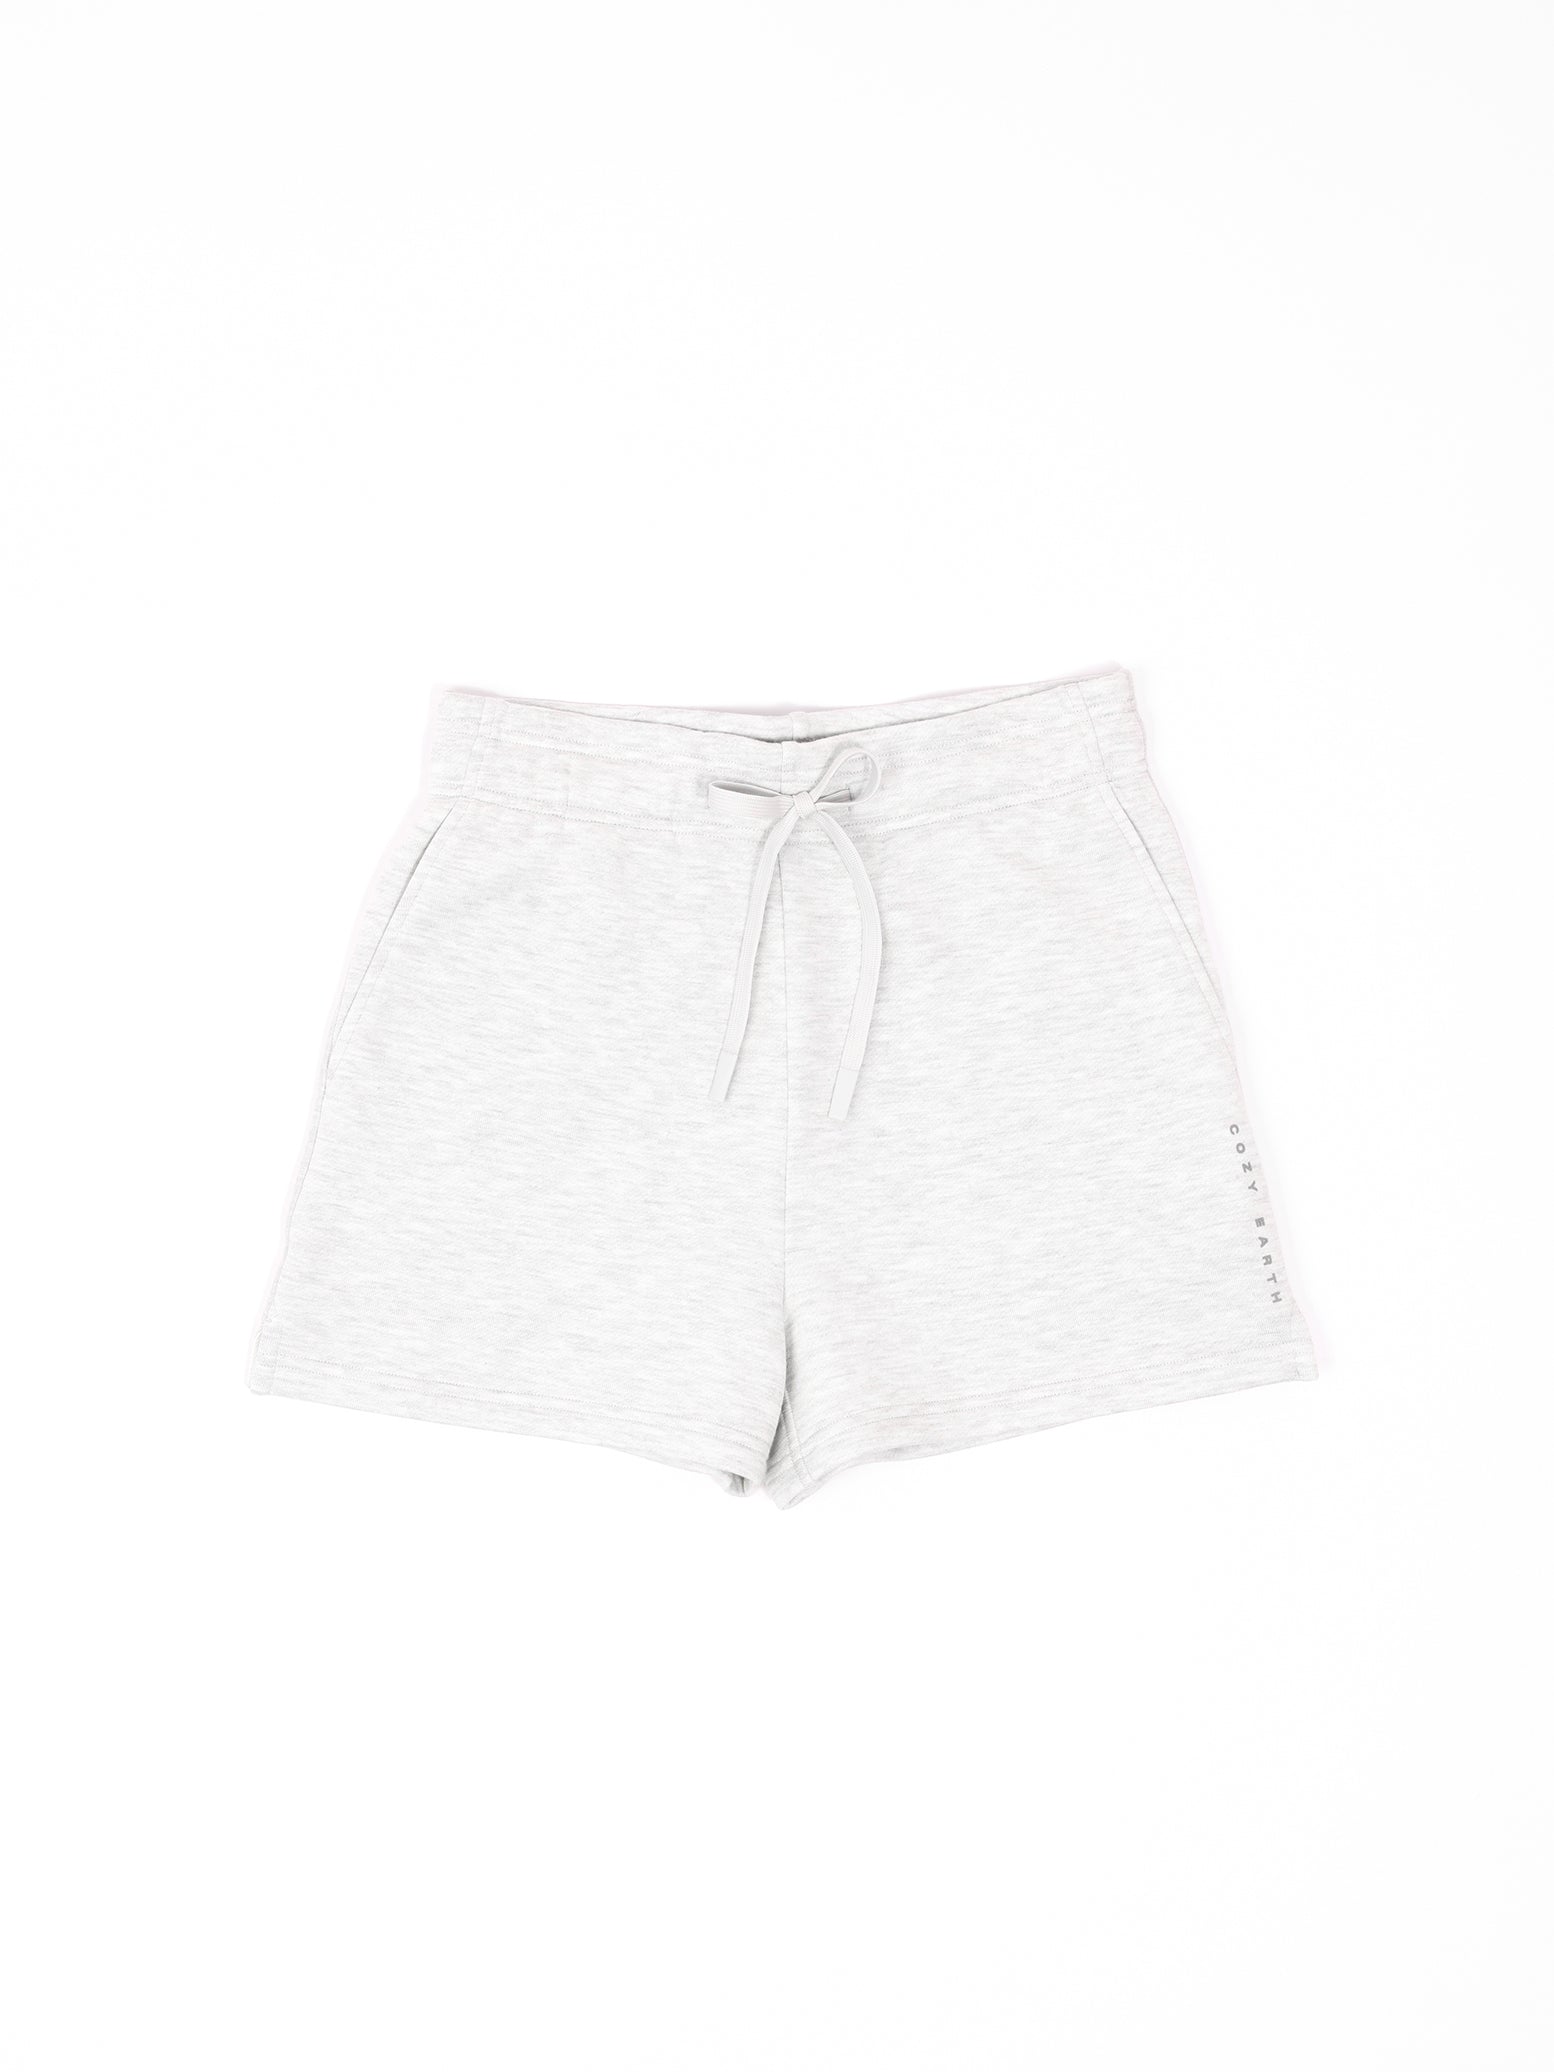 Heather Grey CityScape Shorts. The shorts are laying flat over a background that is white. 